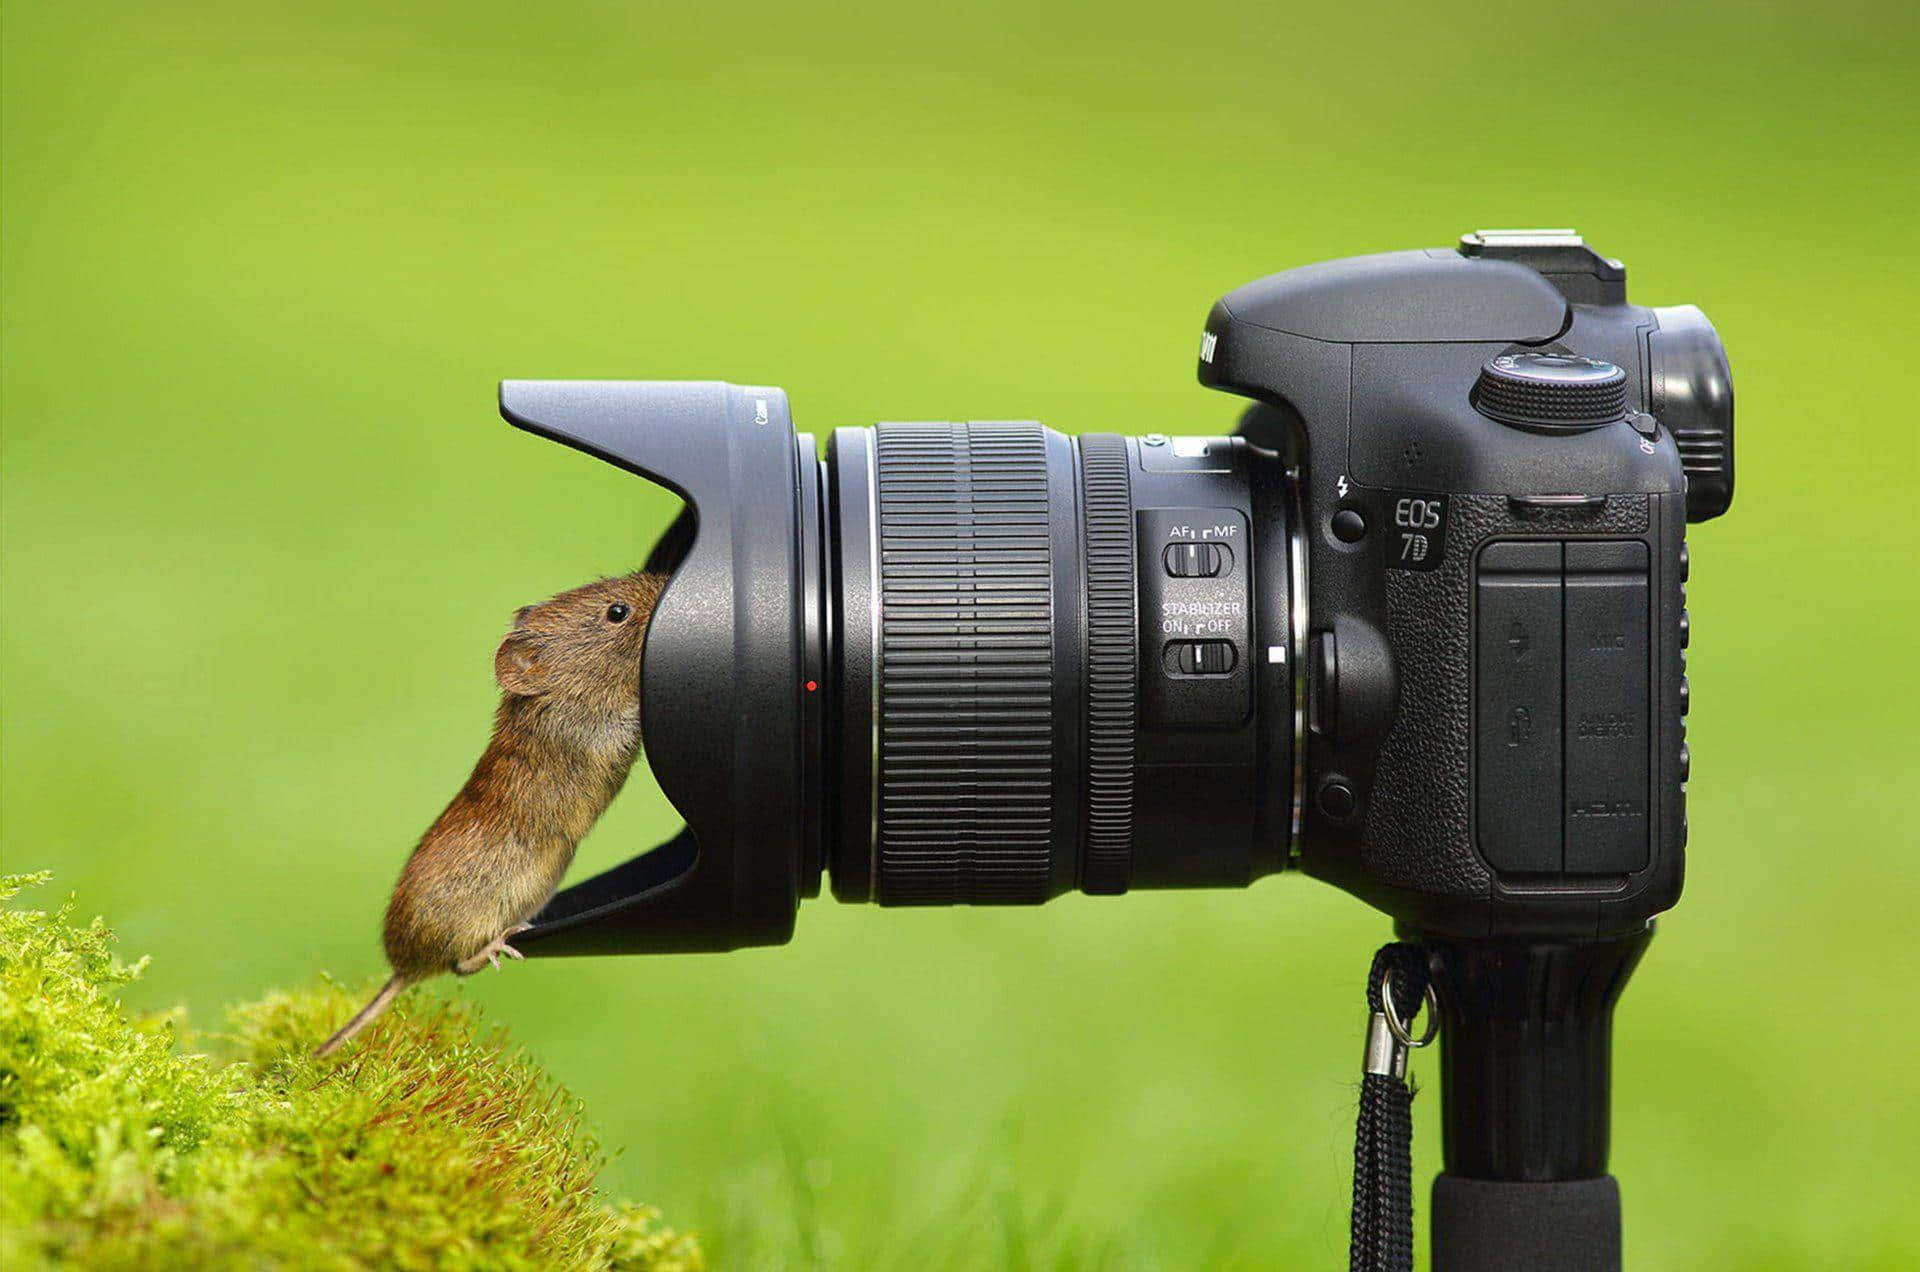 A Mouse Is Standing On Top Of A Camera Lens